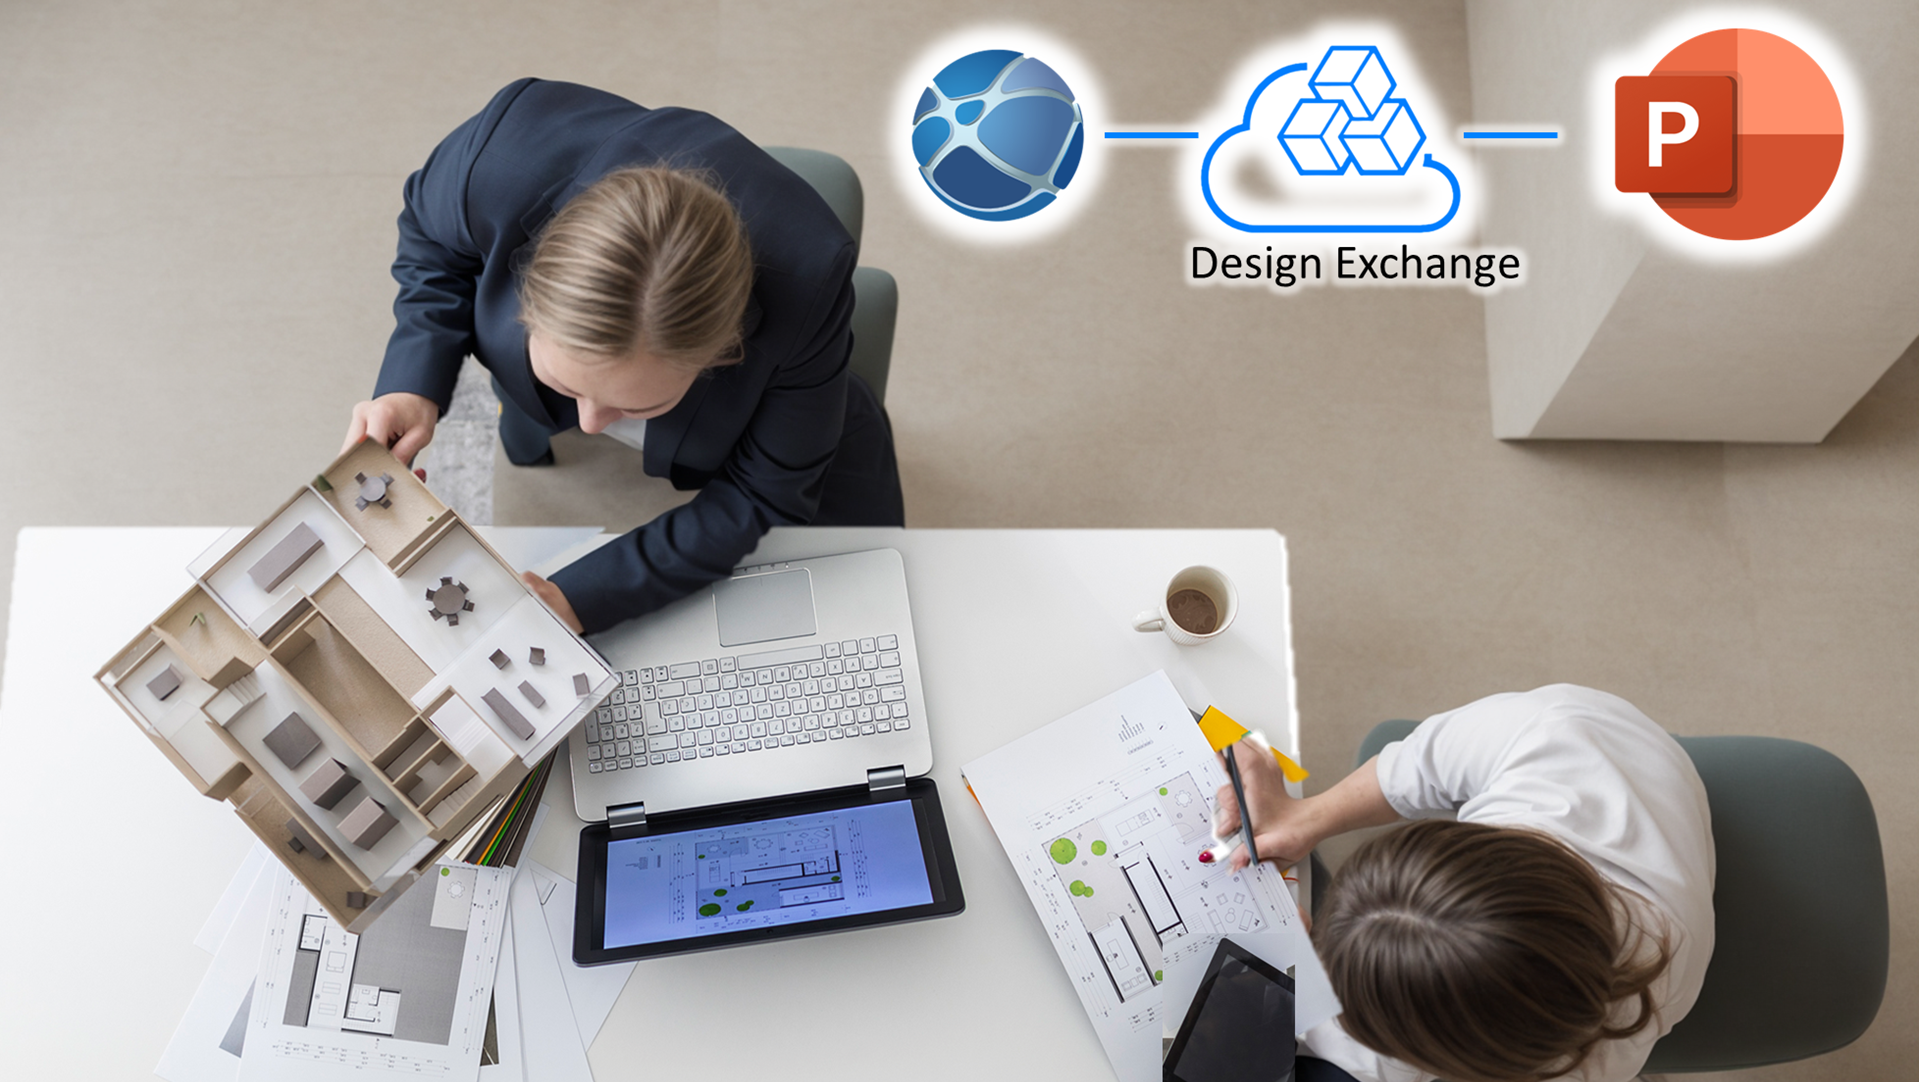 CCTech and Autodesk Introduce the '3D Design Exchange'